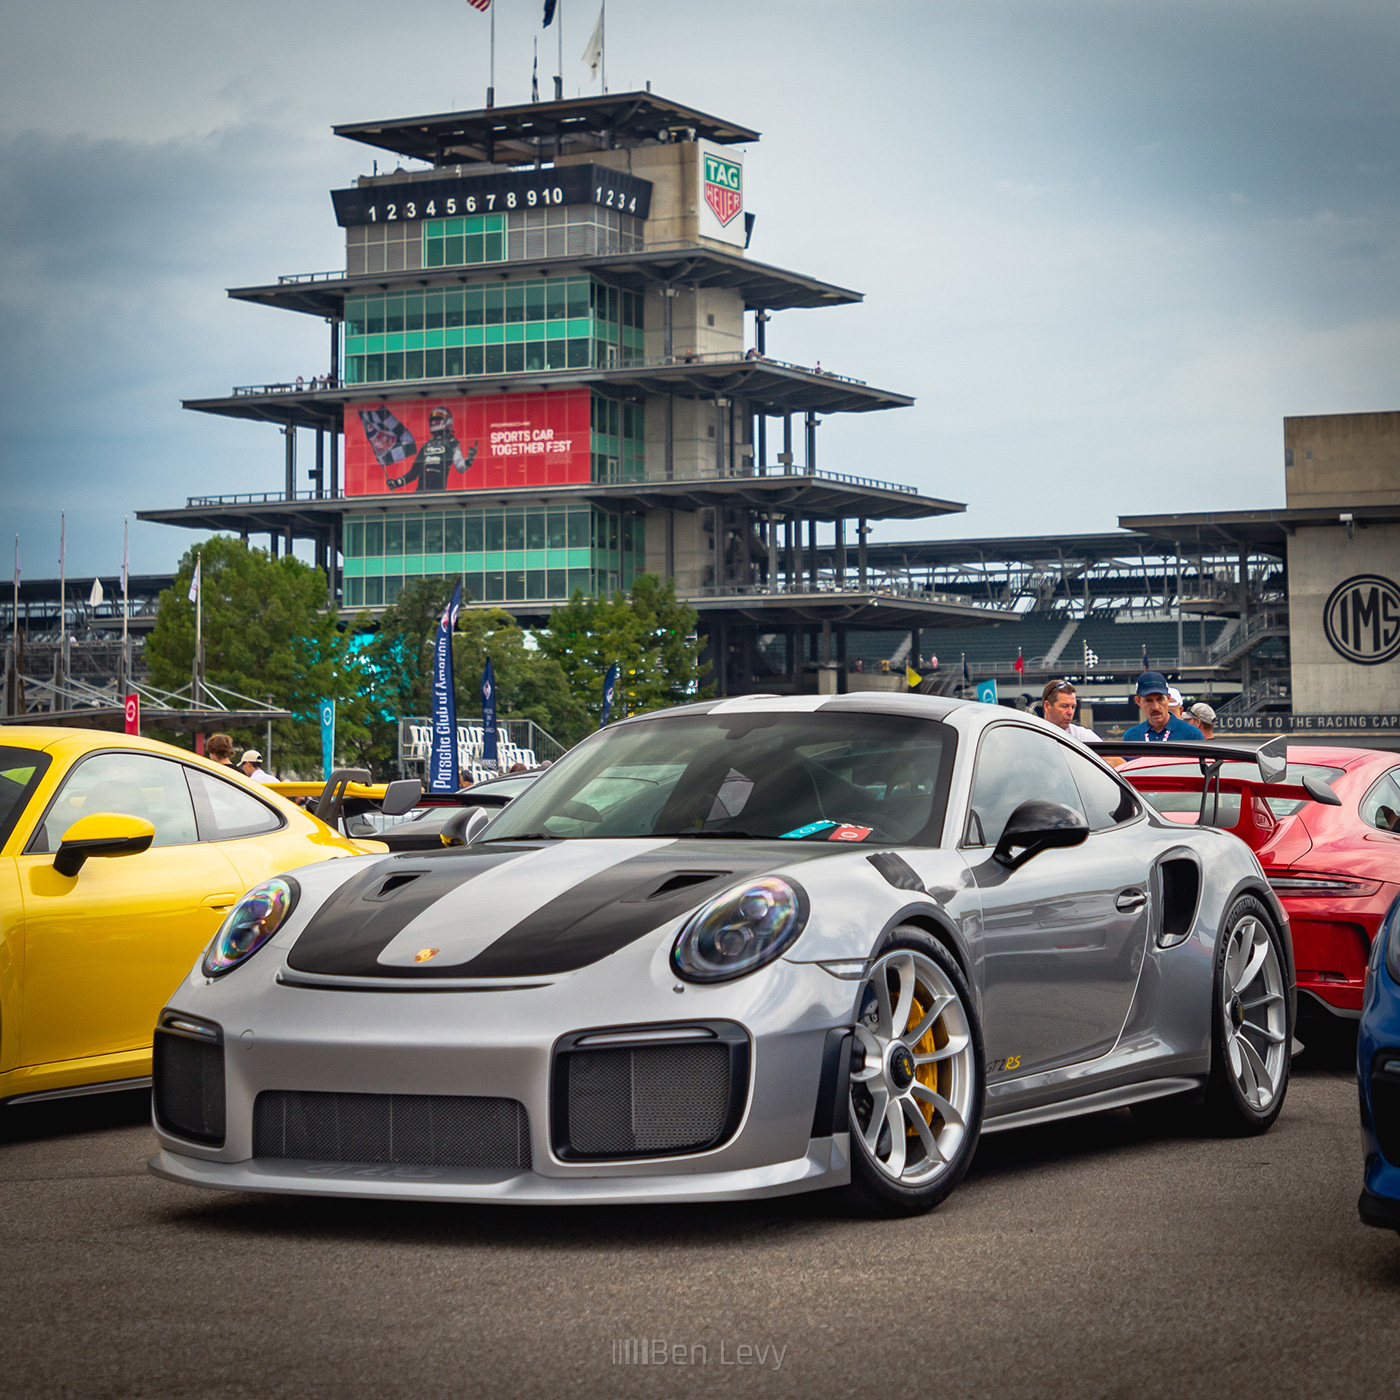 Silver Porsche 991 GT2 RS at Sports Car Together Fest at Indianapolis Motor Speedway